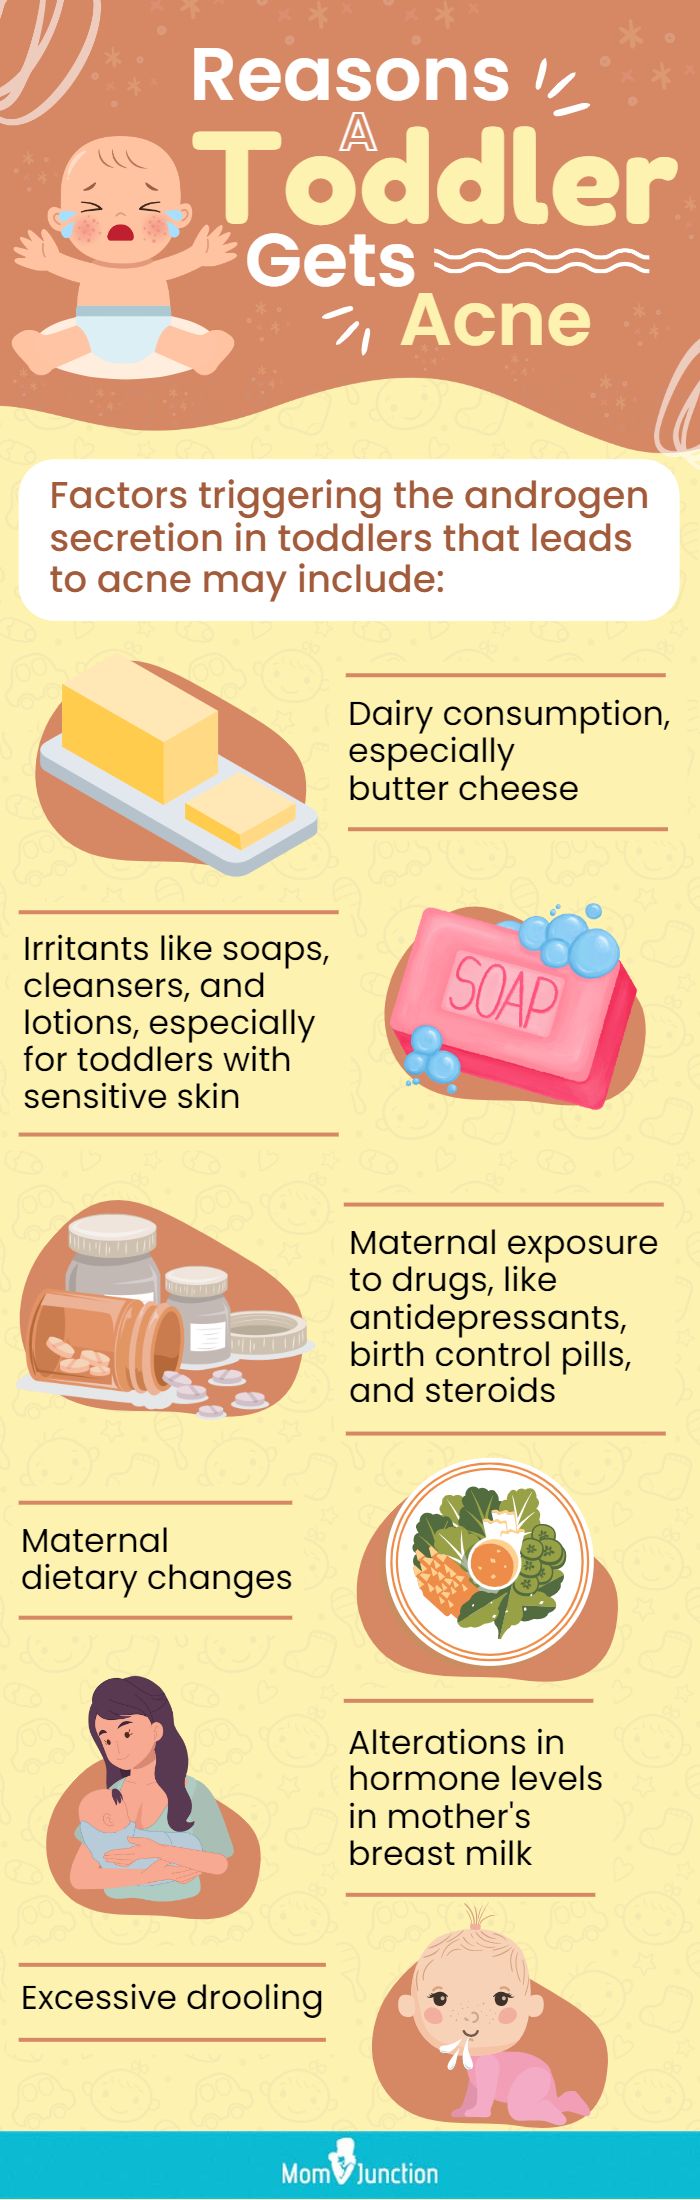 reasons a toddler gets acne [infographic]